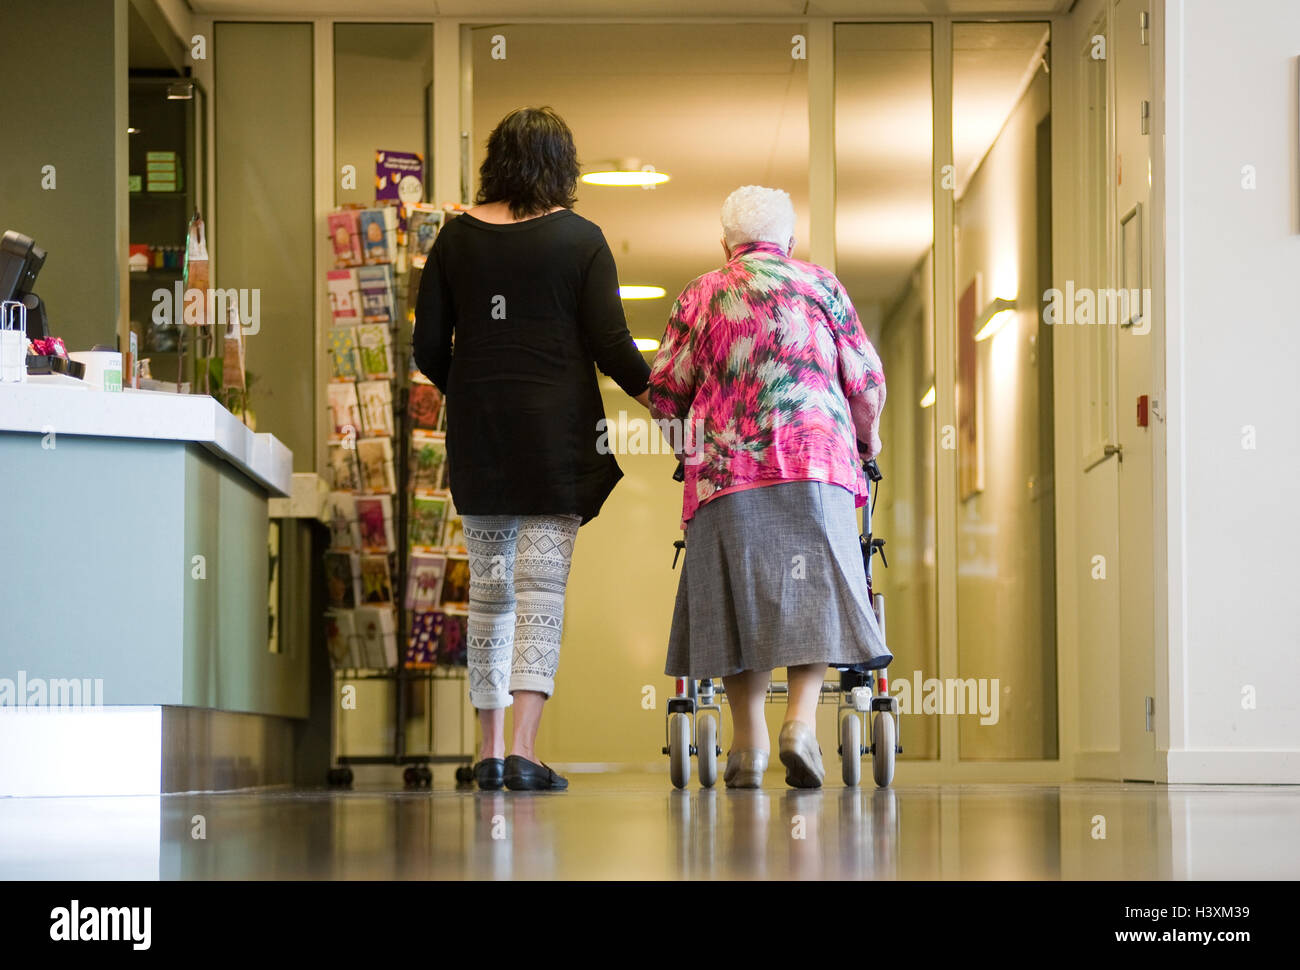 ALMELO, THE NETHERLANDS - JUNE 15, 2016: A woman is assisting an elderly woman with a rollator in an elderly home. Stock Photo